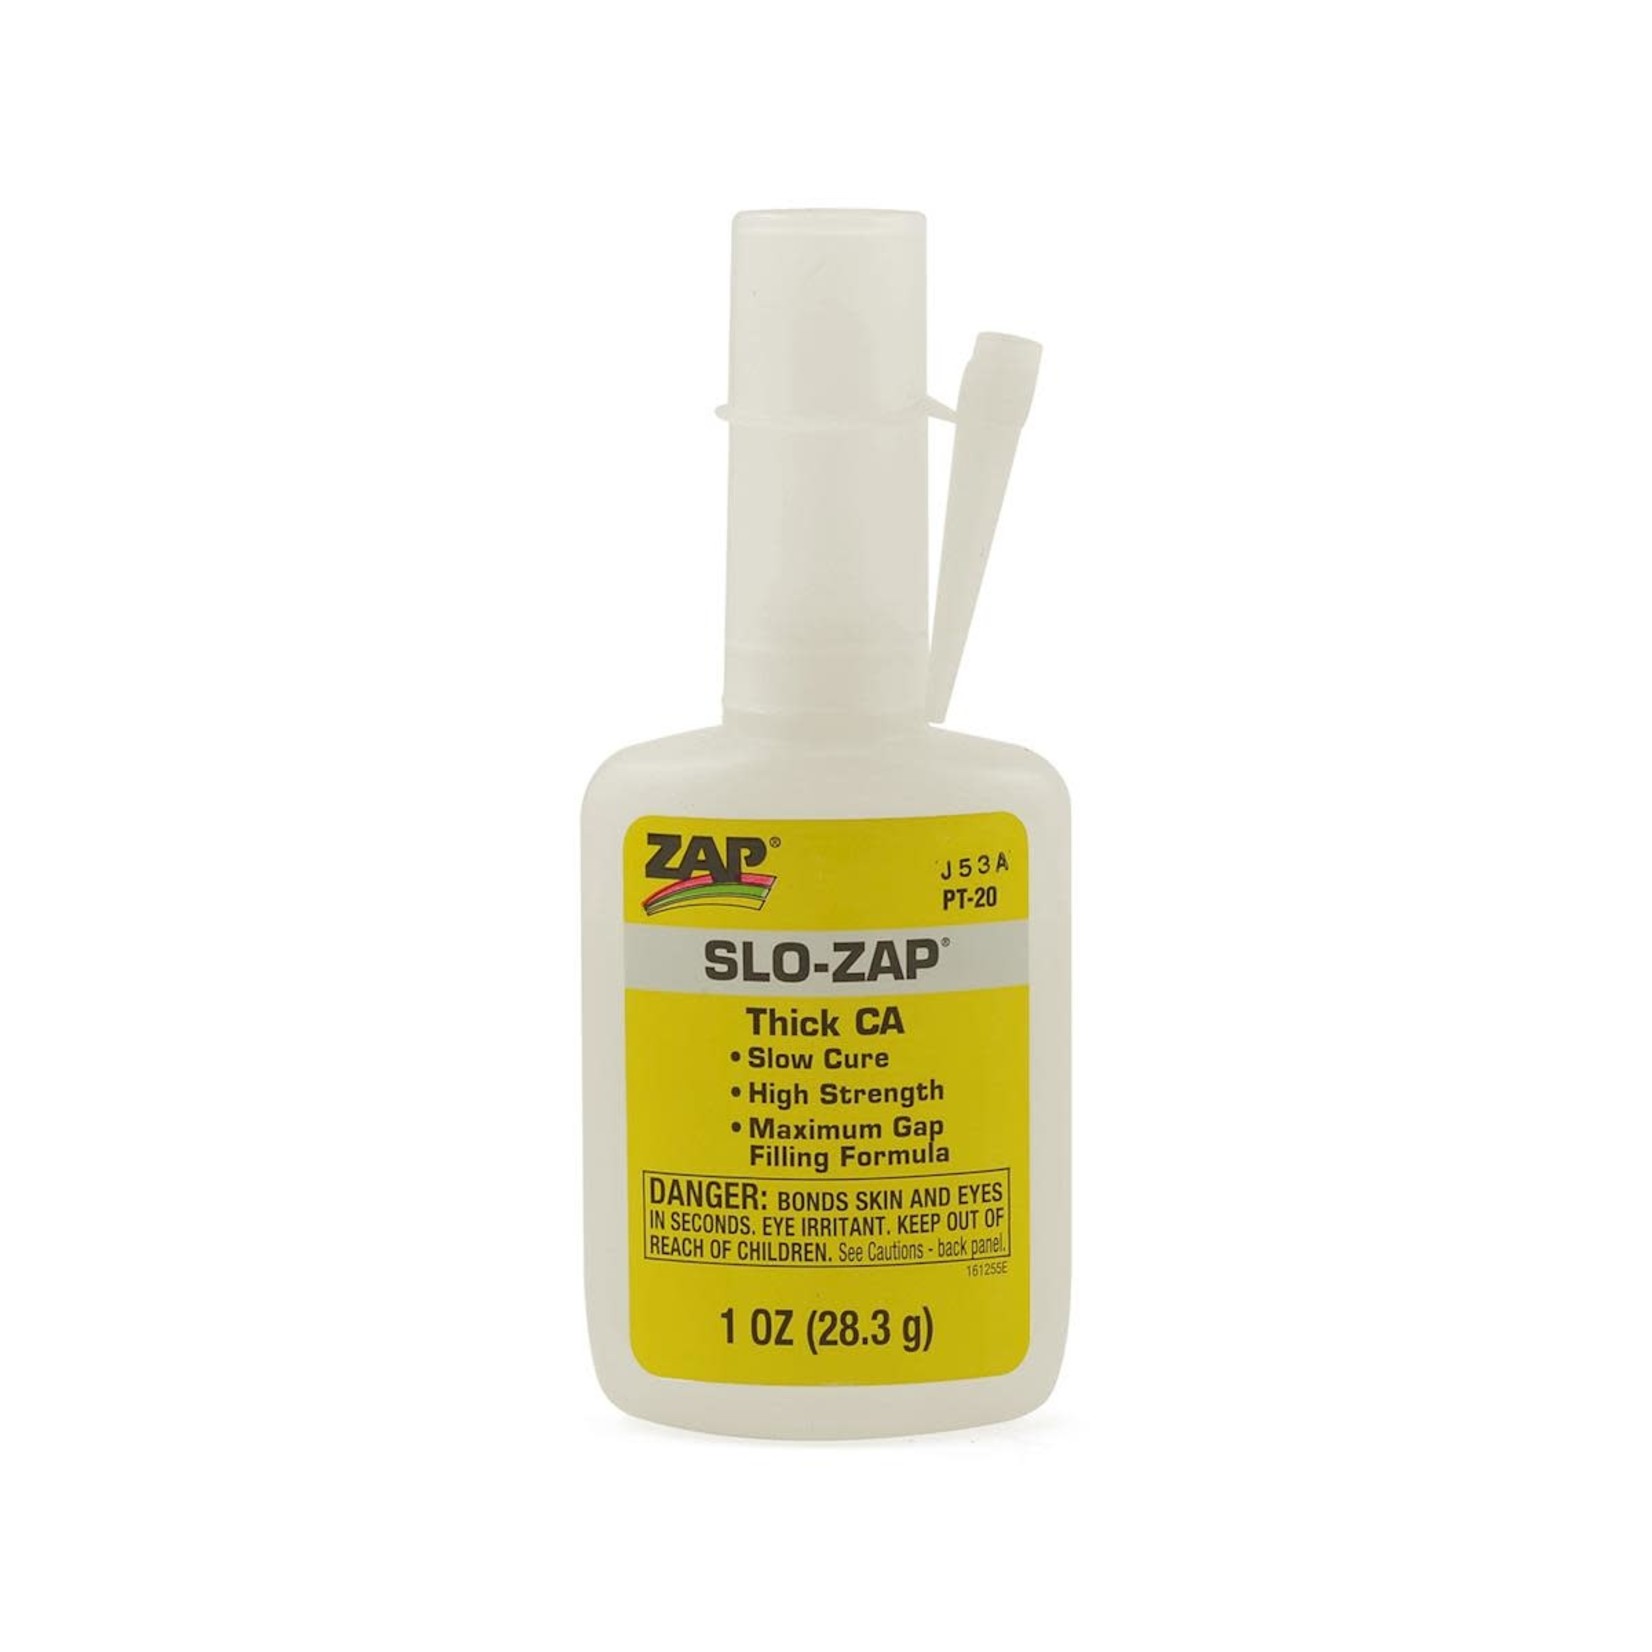 Pacer Technology Pacer Technology Slo-Zap CA Glue (Thick) (1oz) #PT-20